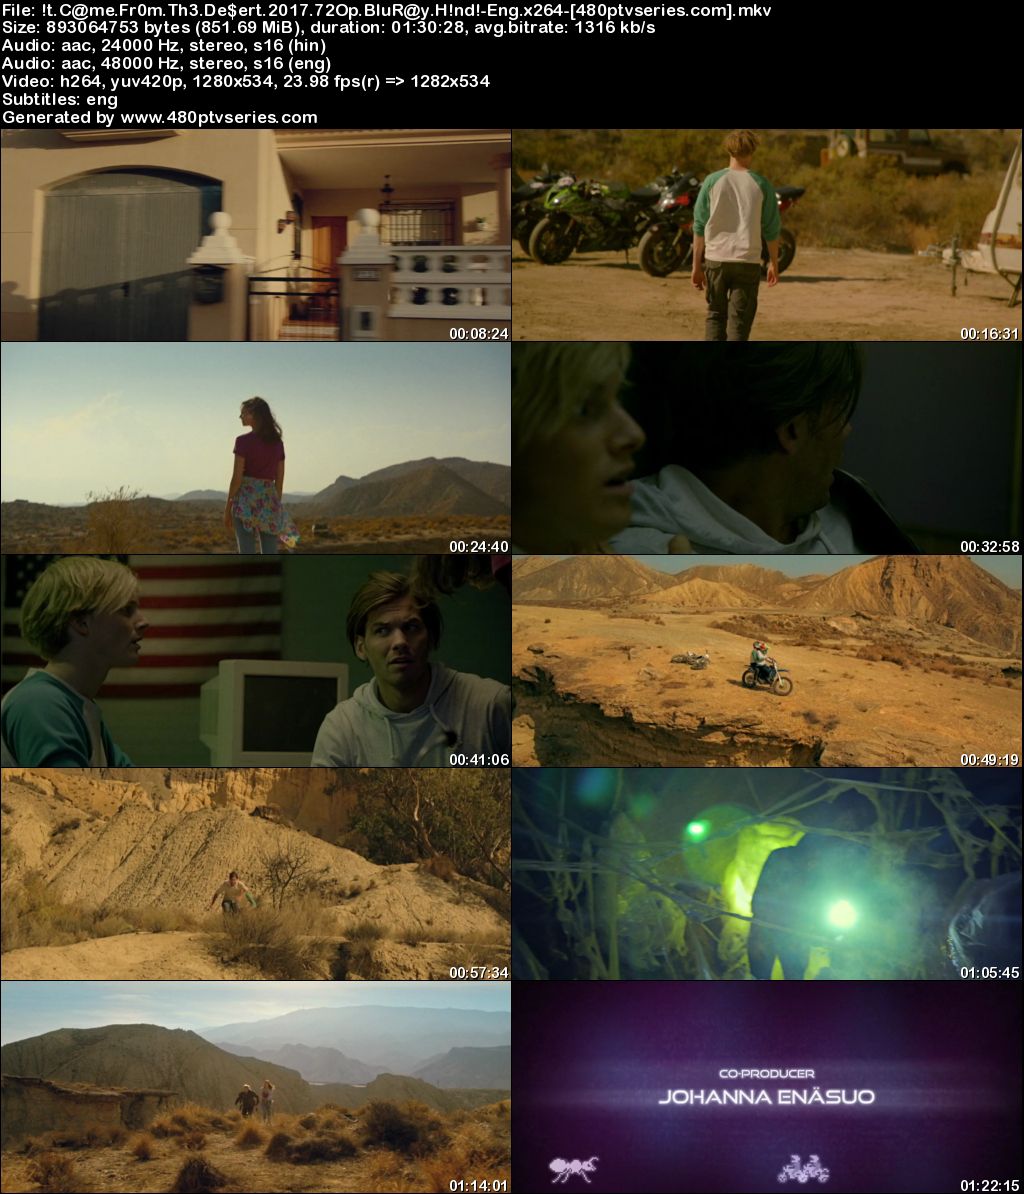 Download It Came from the Desert (2017) 850MB Full Hindi Dual Audio Movie Download 720p BluRay Free Watch Online Full Movie Download Worldfree4u 9xmovies